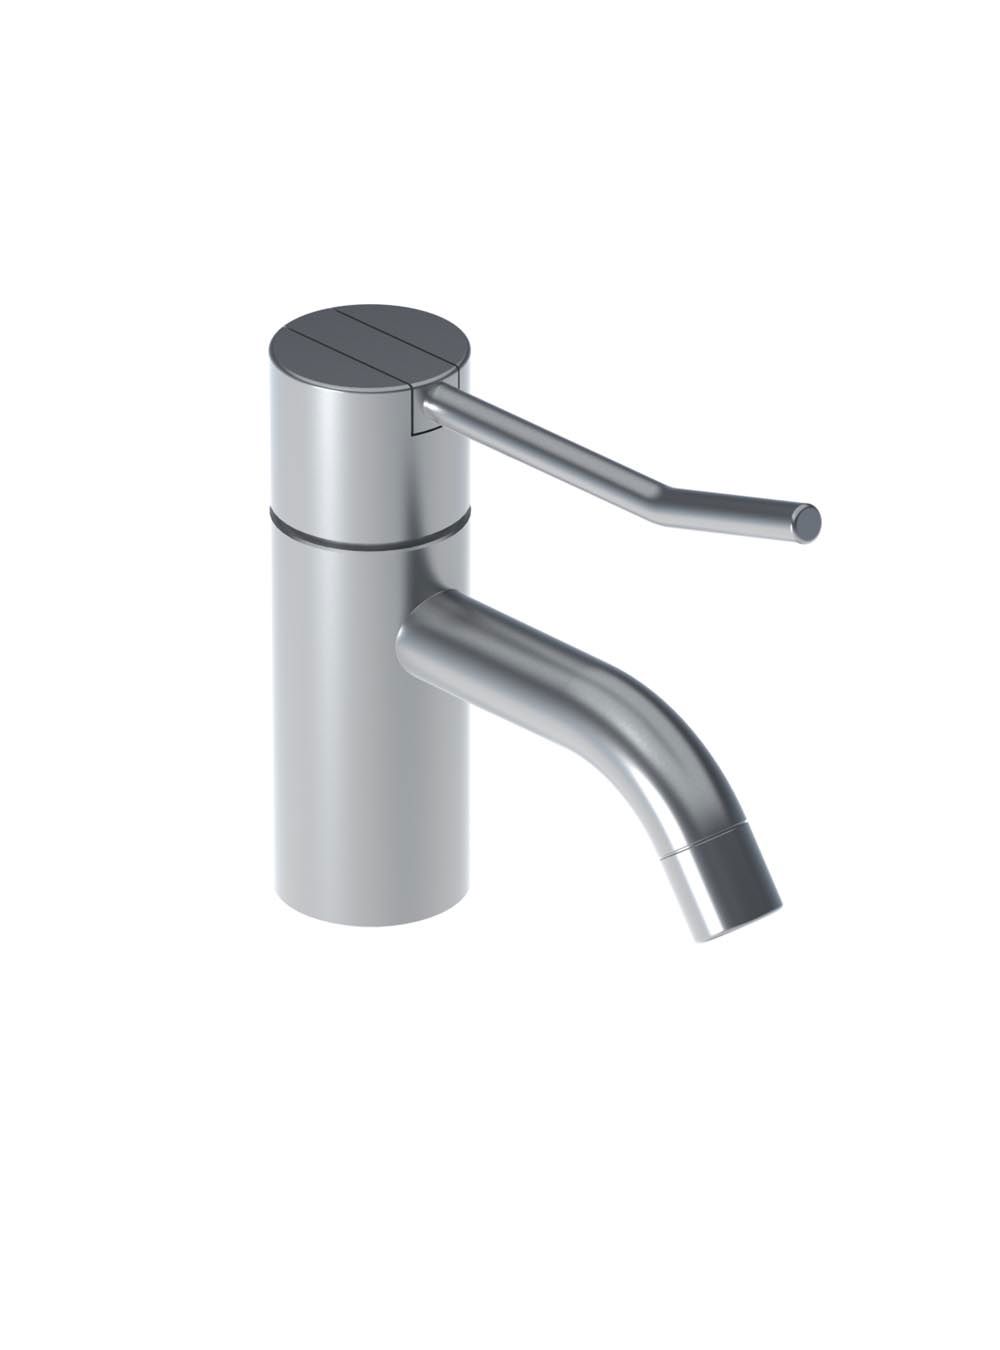 HV1L: One-handle mixer with ceramic disc technology, with long lever and fixed spout with water saving aer